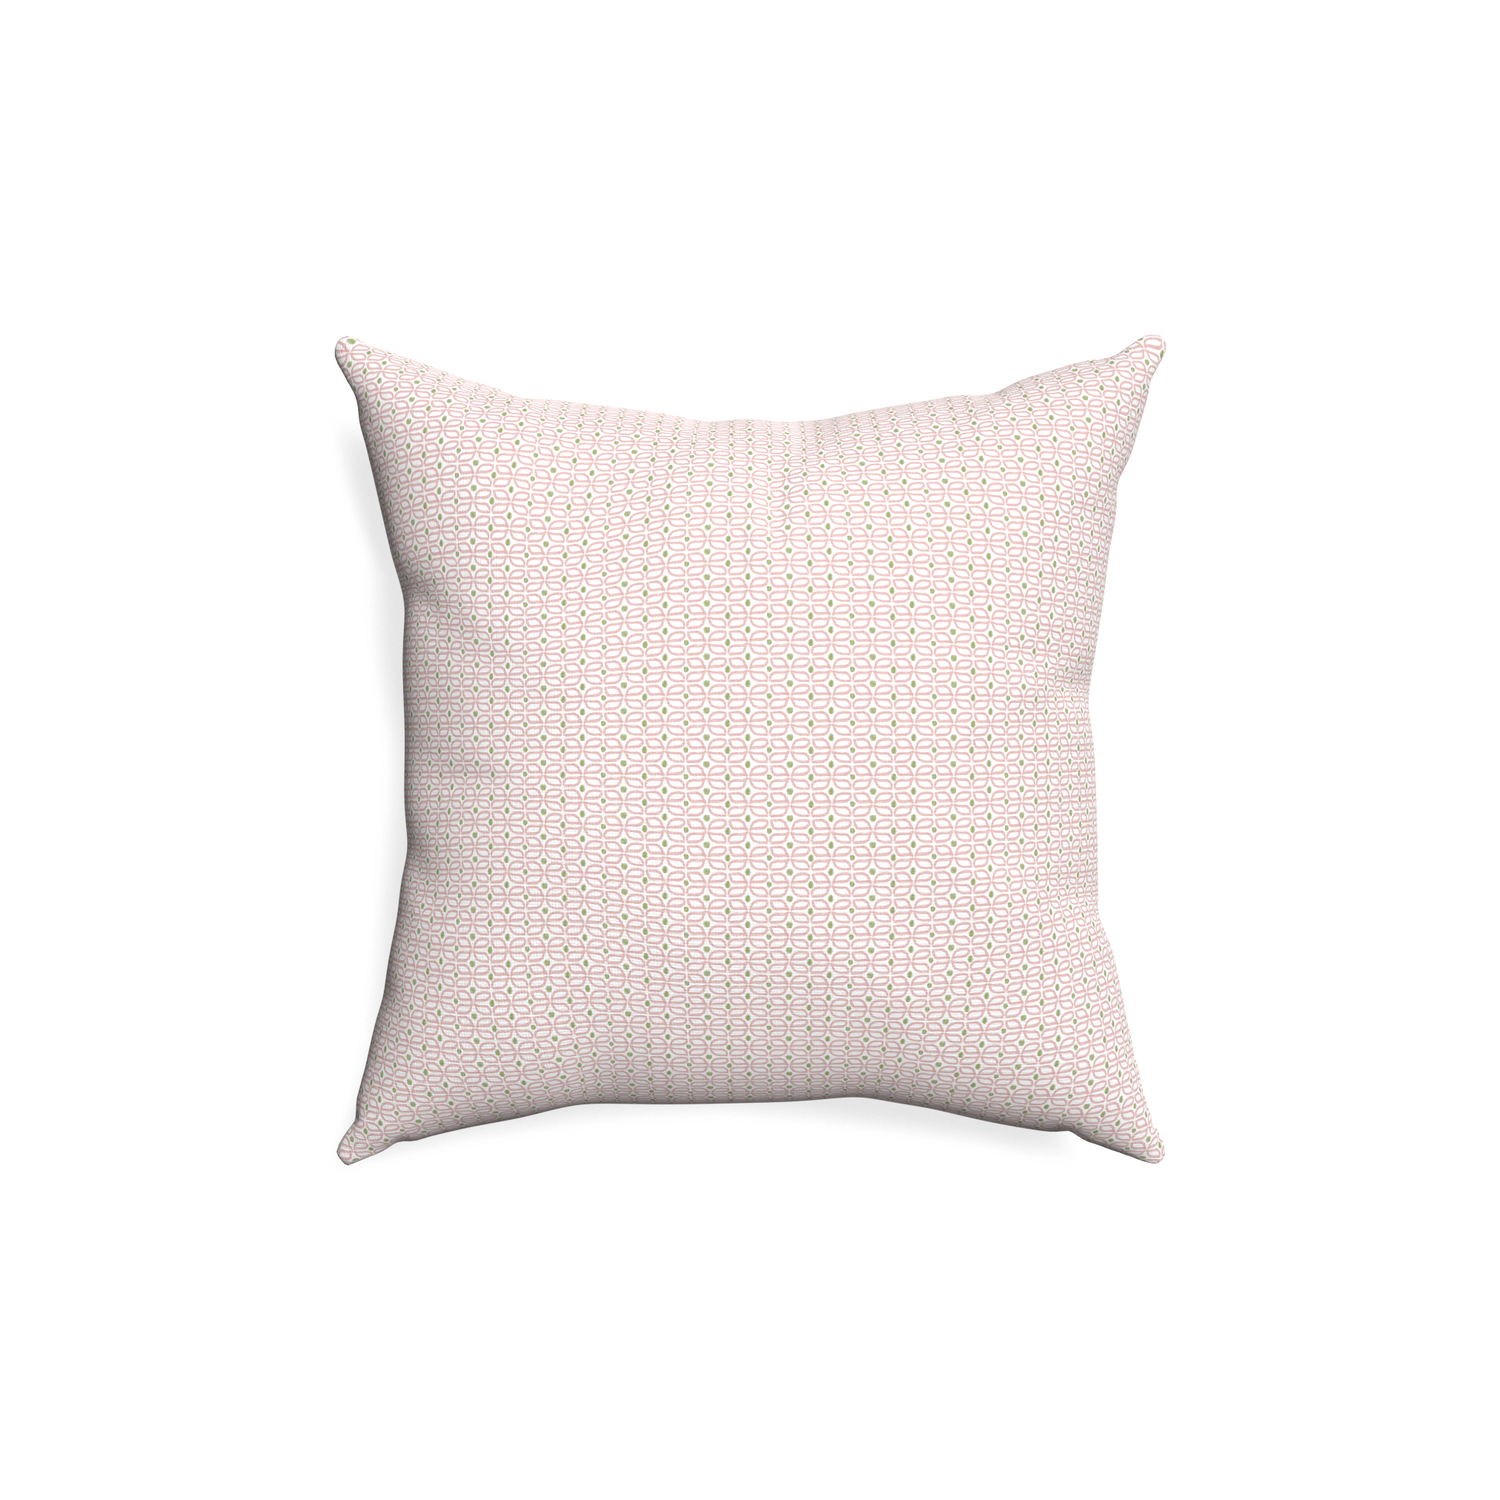 18-square loomi pink custom pink geometricpillow with none on white background